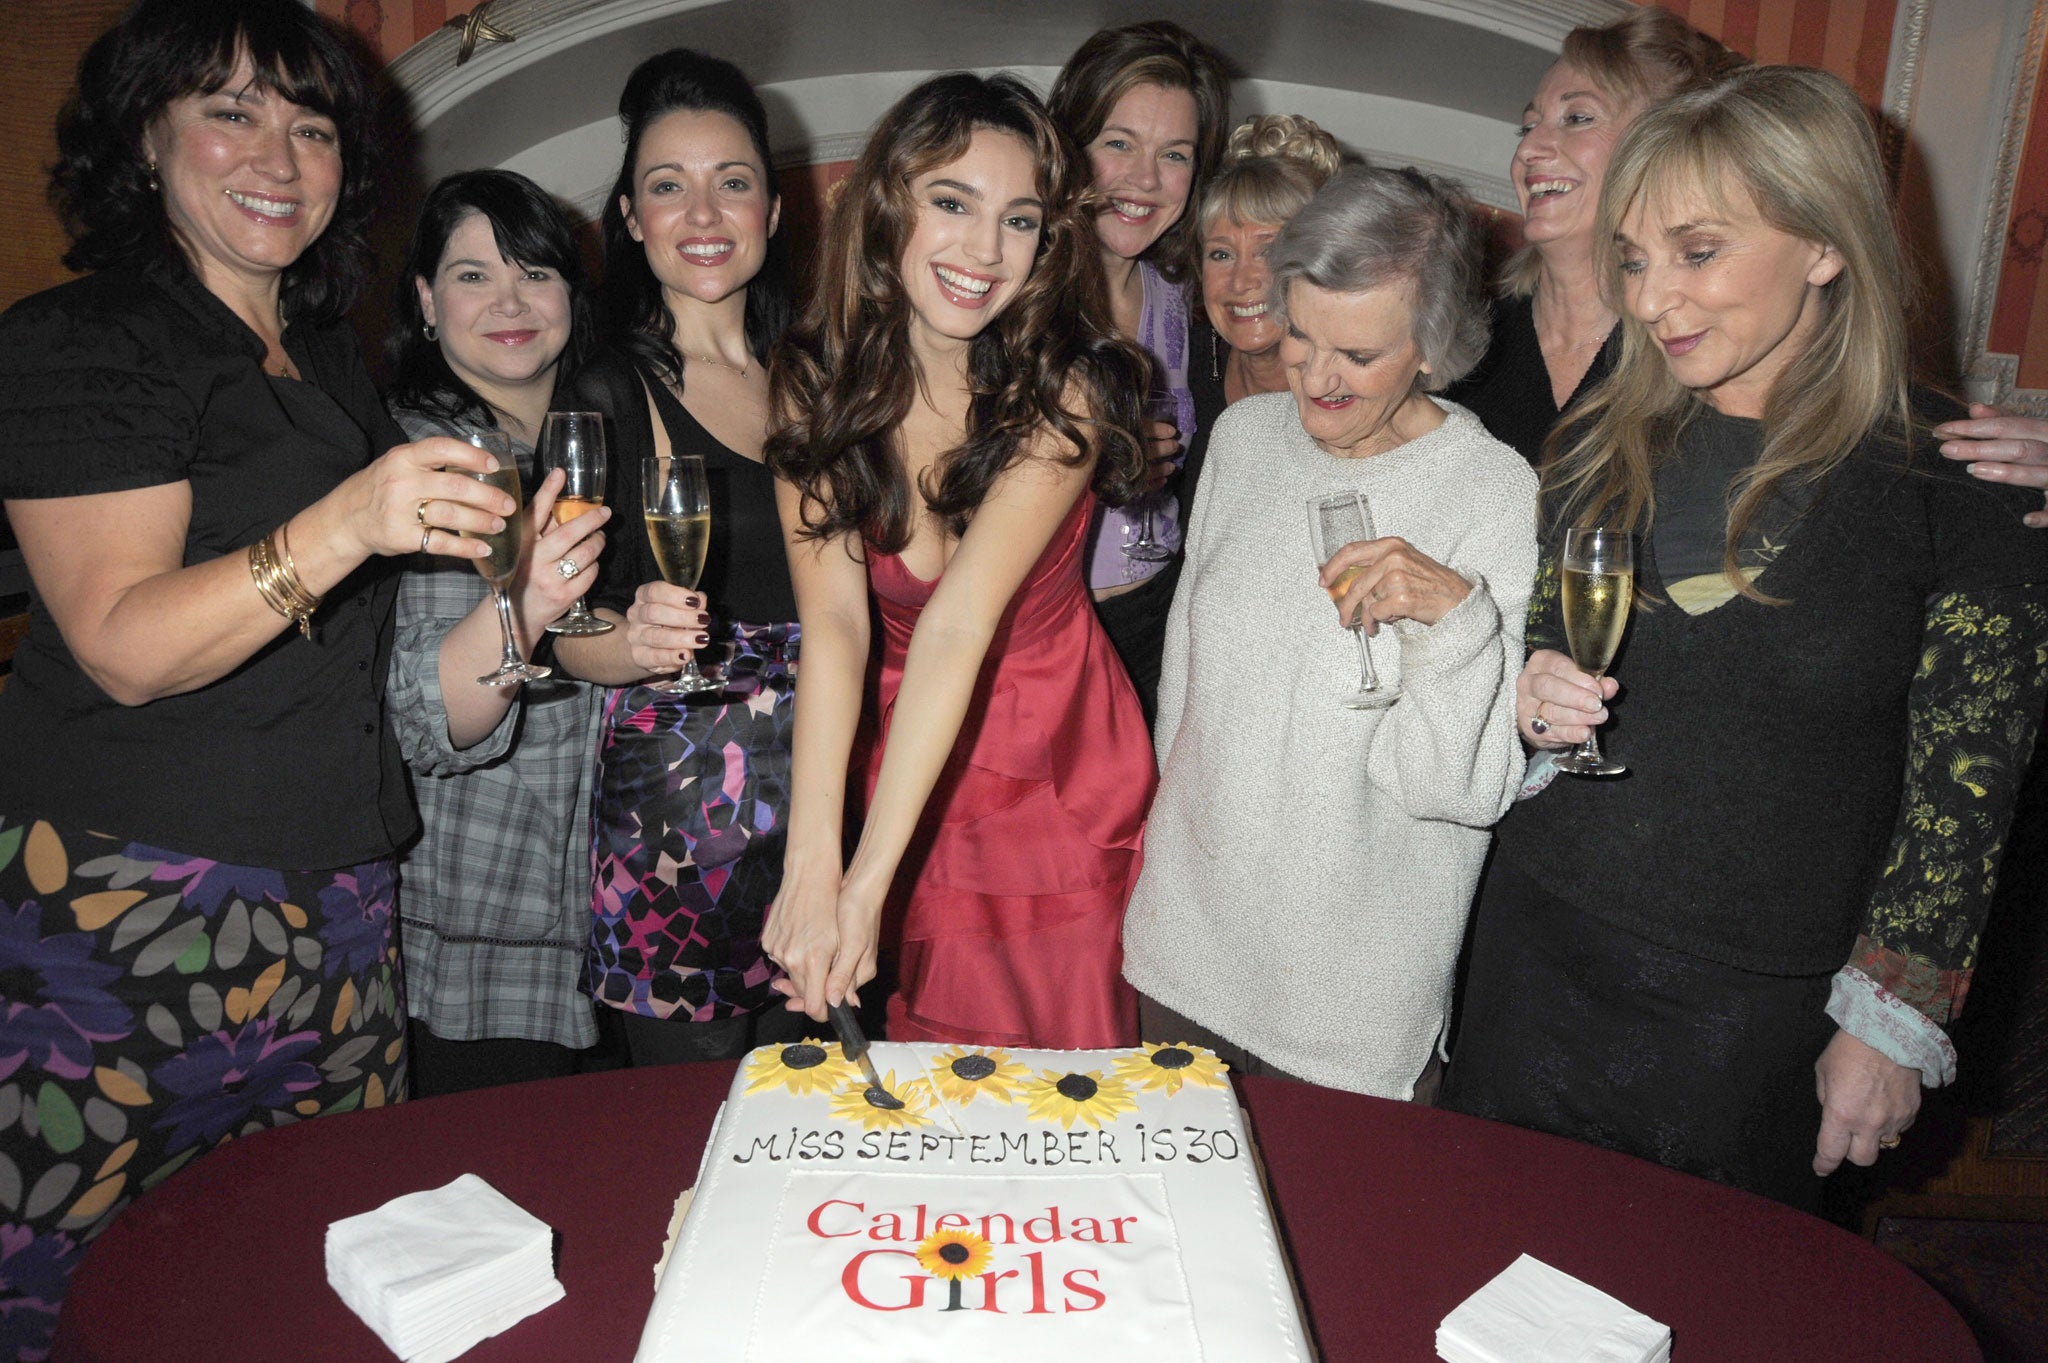 Arabella Weir (far left) with other members of the cast of 'Calendar Girls' in 2009